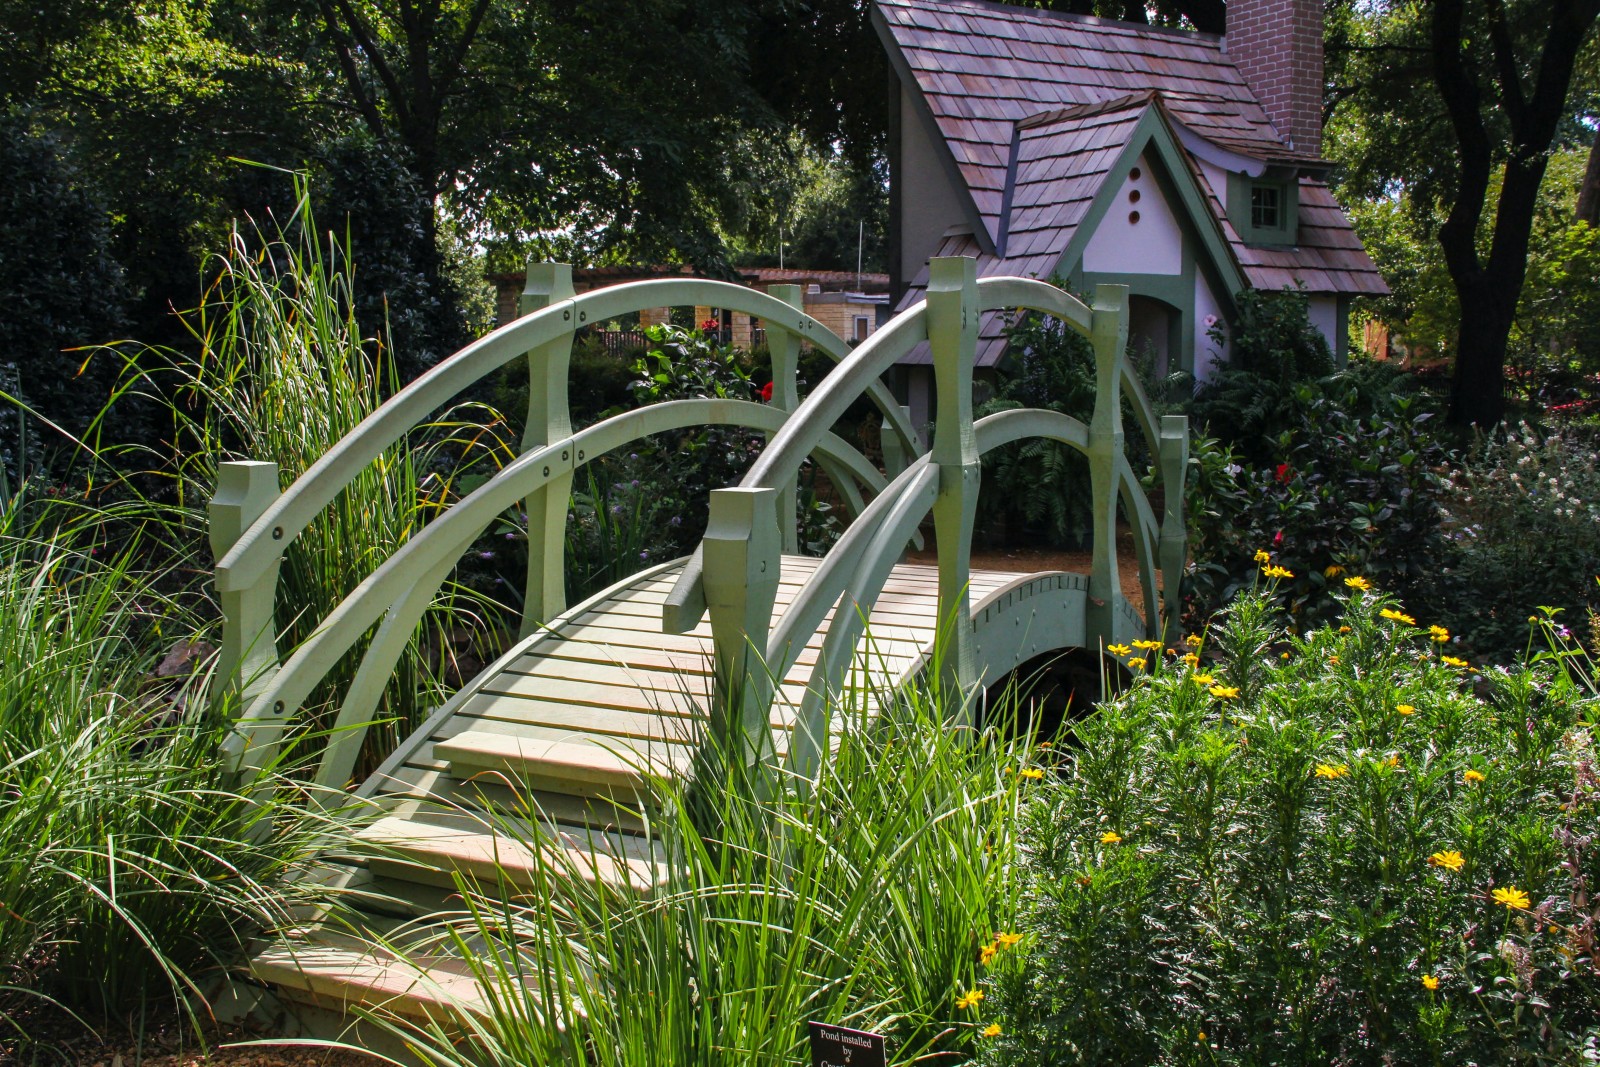 Green bridge surrounded by plants with a house in the background during daytime